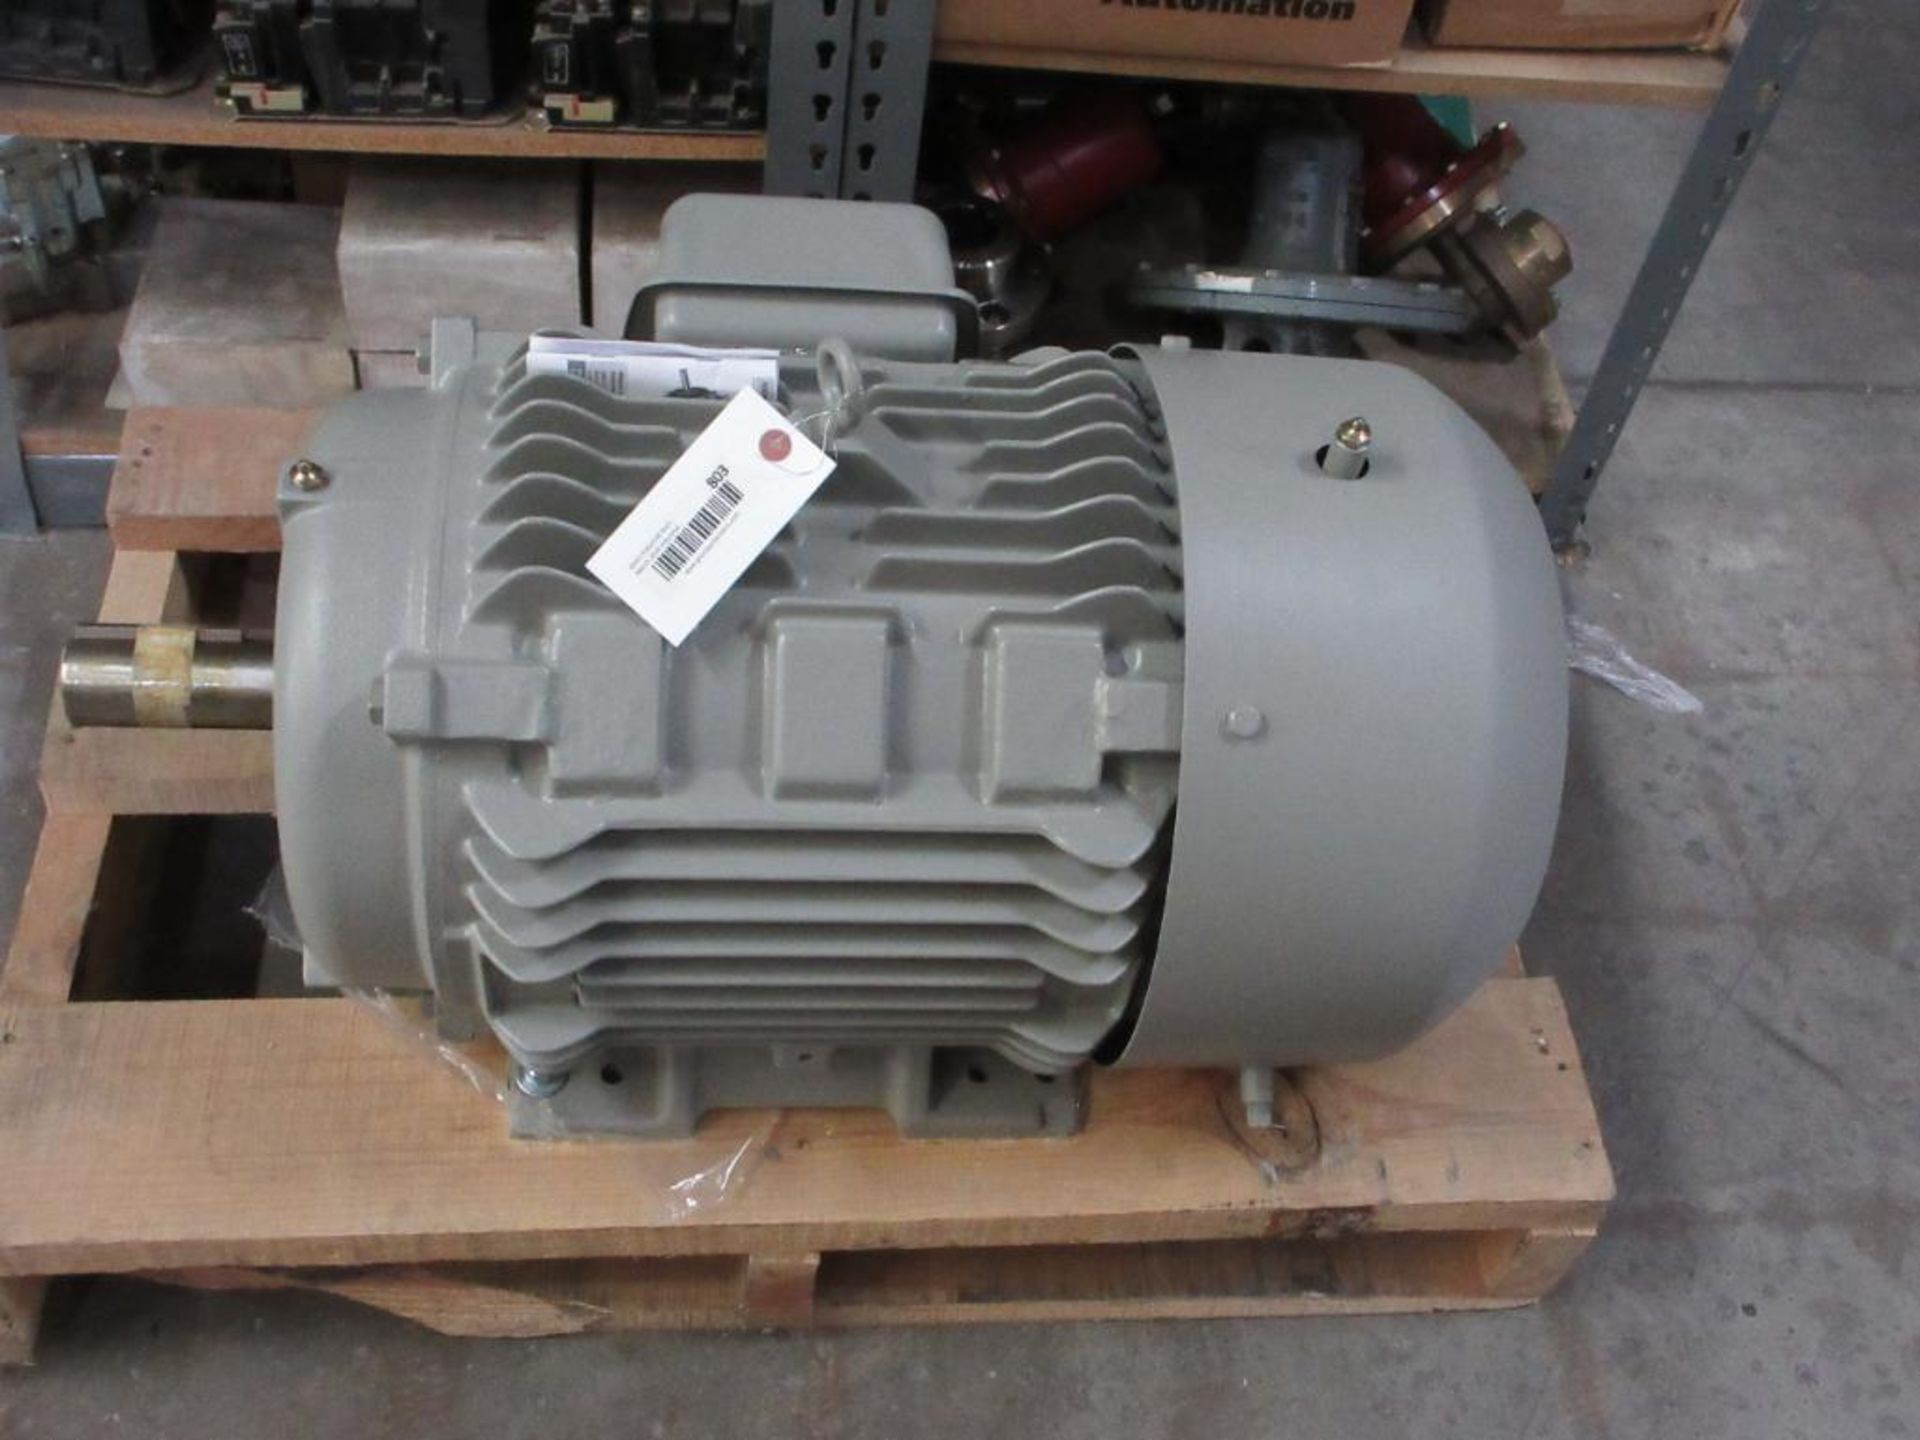 SIEMENS MOTOR 25HP 3 PHASE 1800RPM FRAME 284T P/N ILE22212CB116AA3 (THIS LOT IS FOB CAMARILLO CA) - - Image 3 of 8